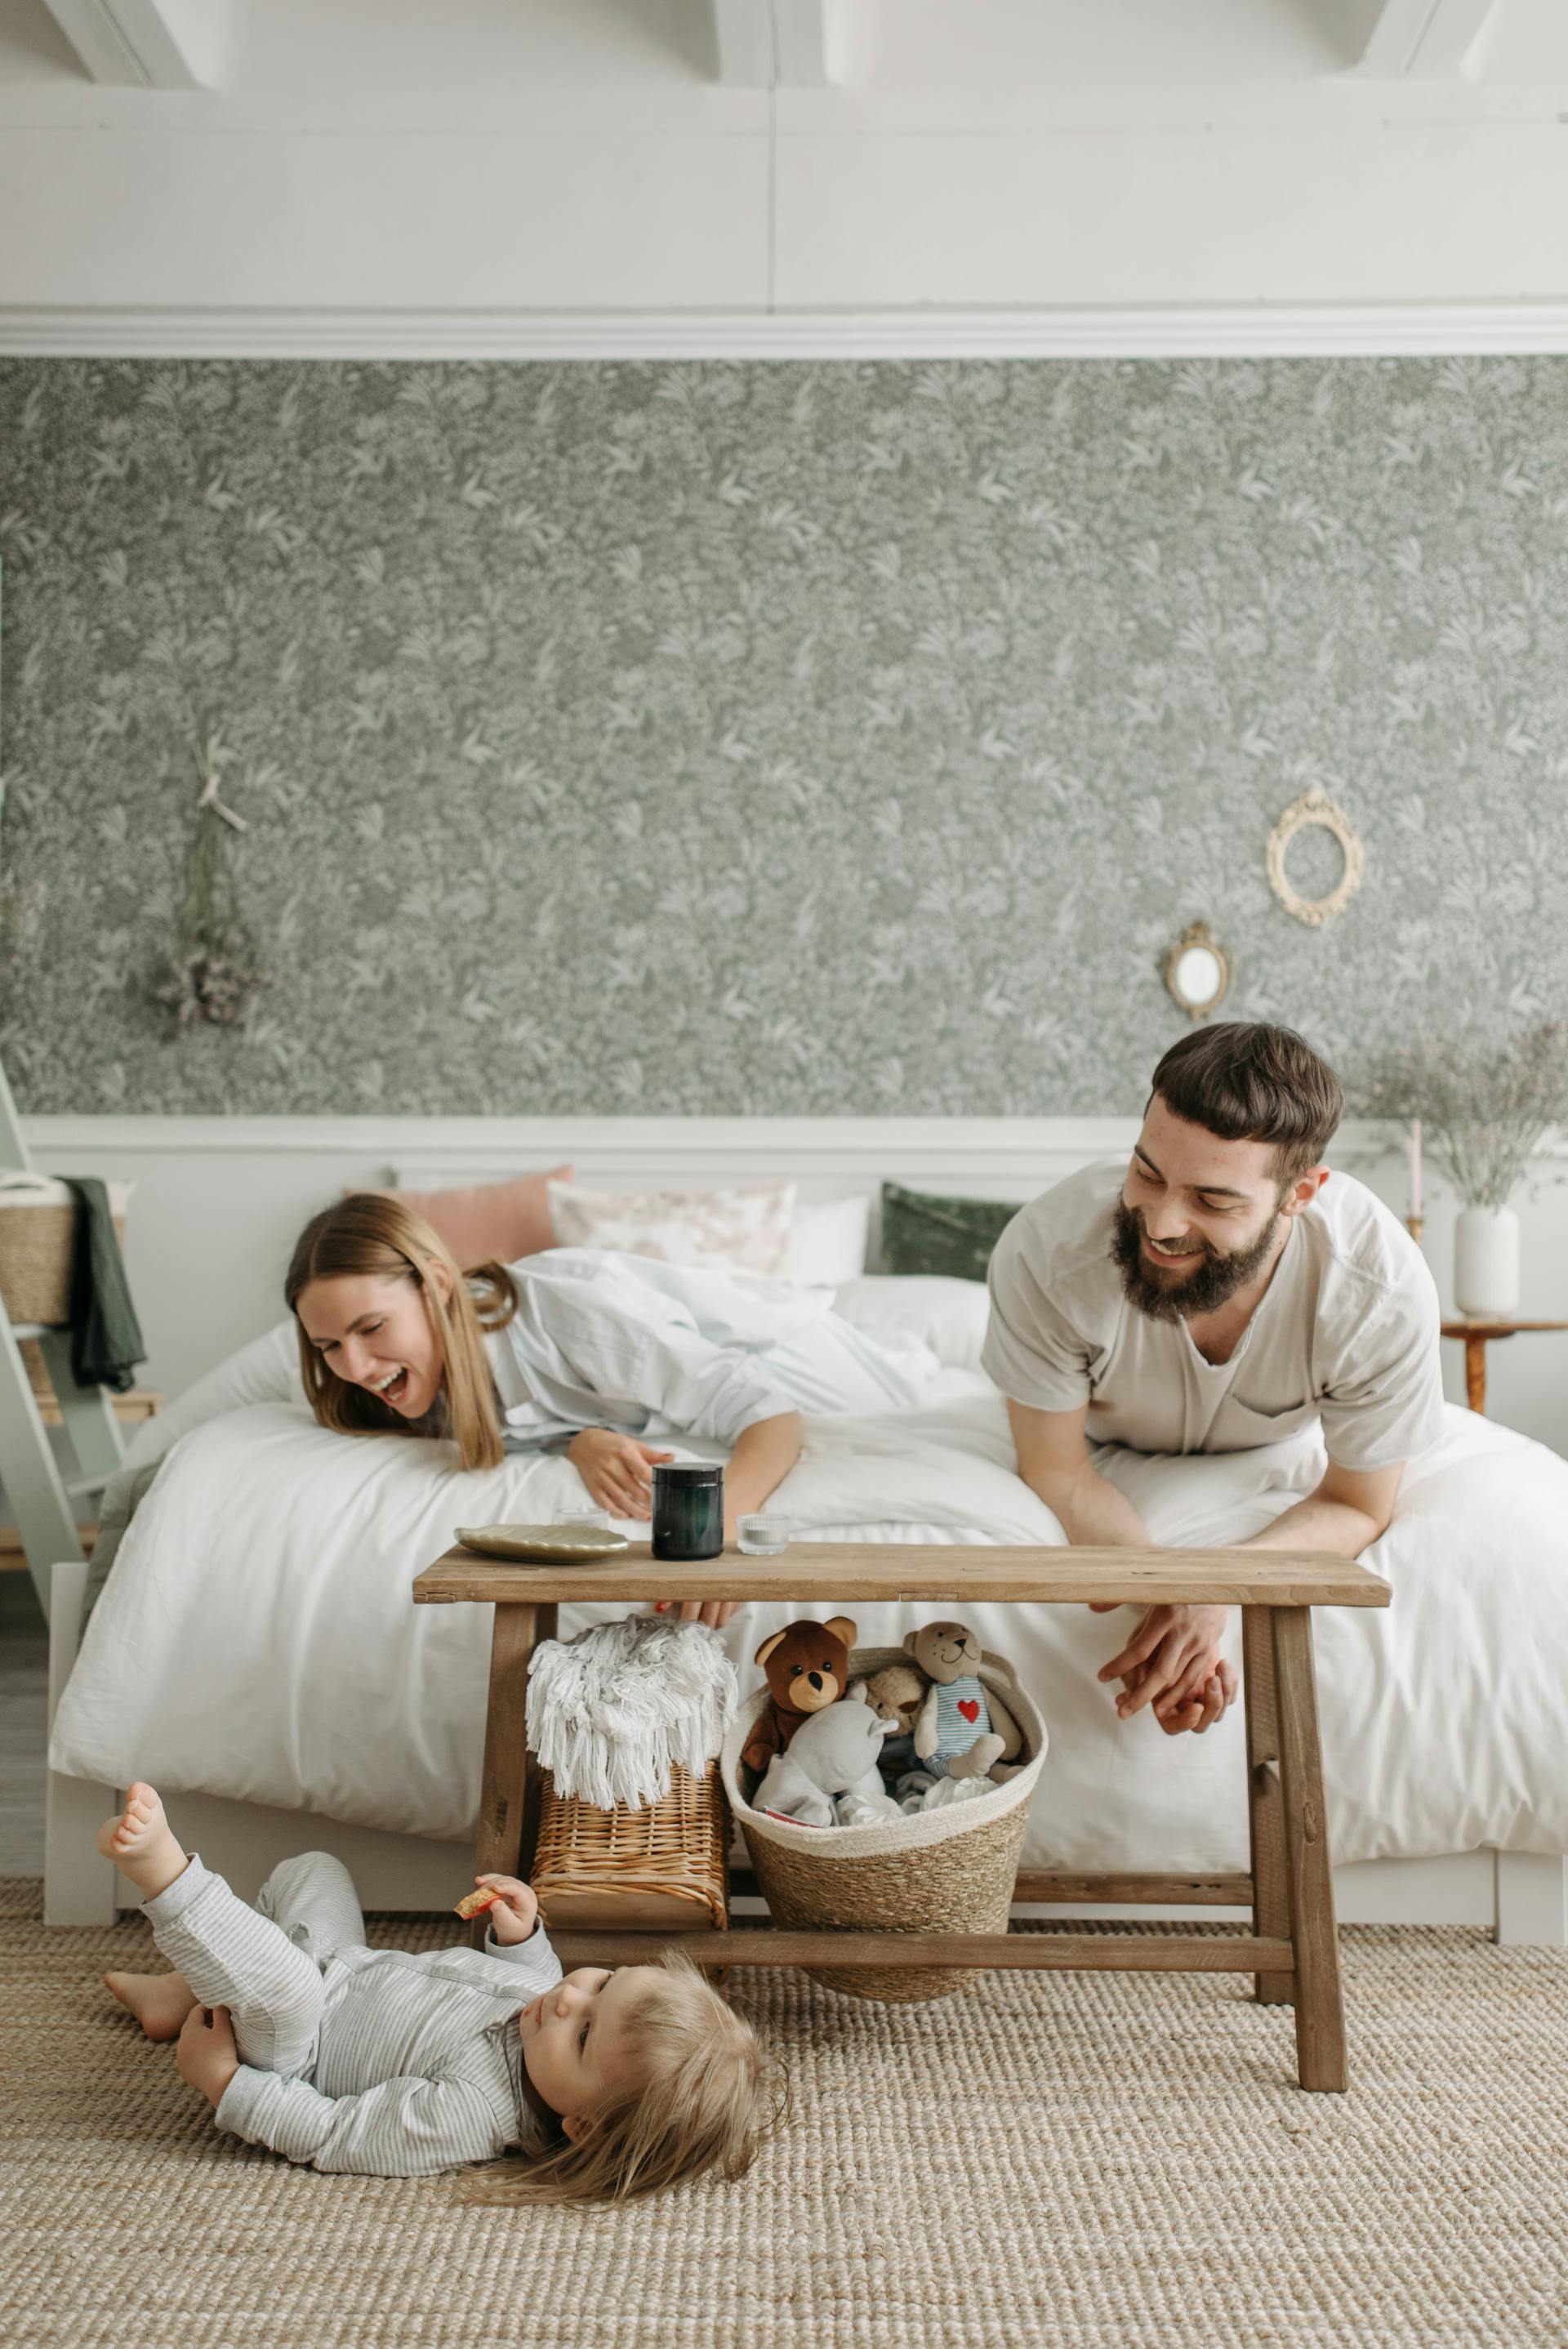 A couple lying on the bed watching their little daughter playing on the floor | Source: Pexels